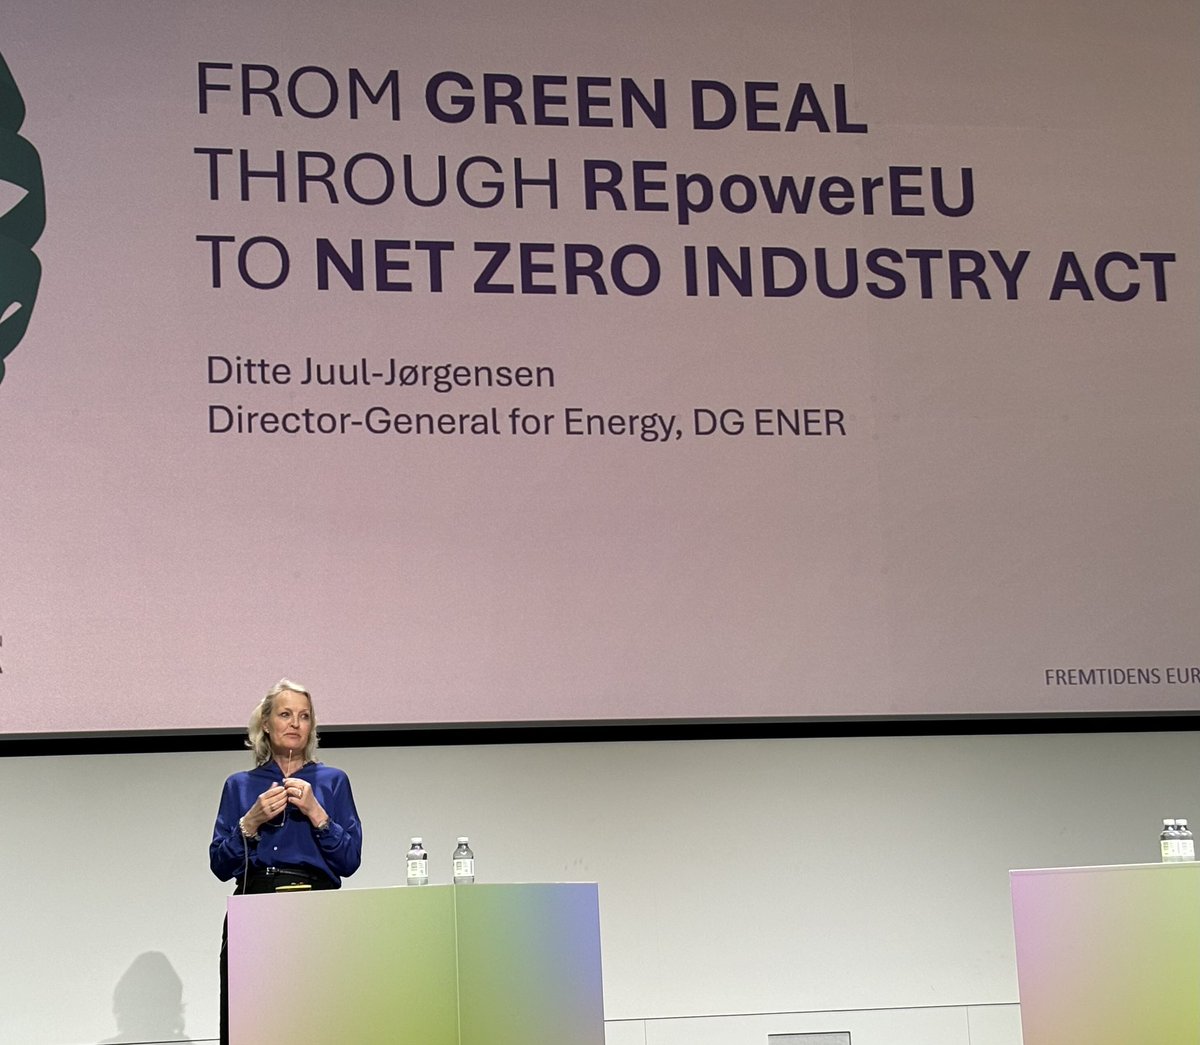 We need to further de-risk investments in energy to speed up the green transition, says @JorgensenJuul.  650 billion euros is needed every year in energy infrastructure in 🇪🇺. Most of it from private investors. Danish pension funds are engage, but risks must be managed. #dkgreen